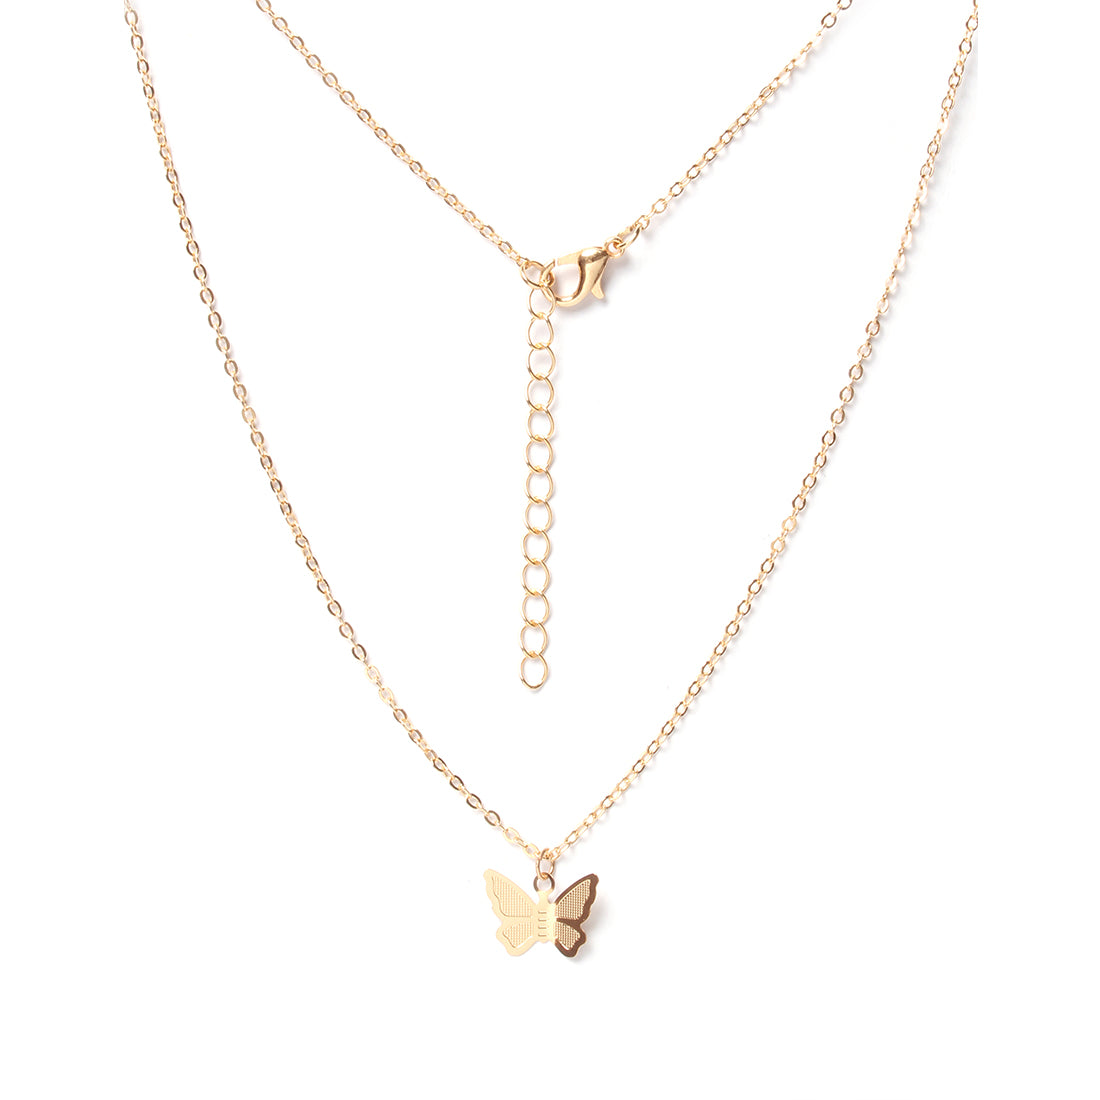 MINI BUTTERFLY PENDANT GOLD-TONED DAINTY NECKLACE